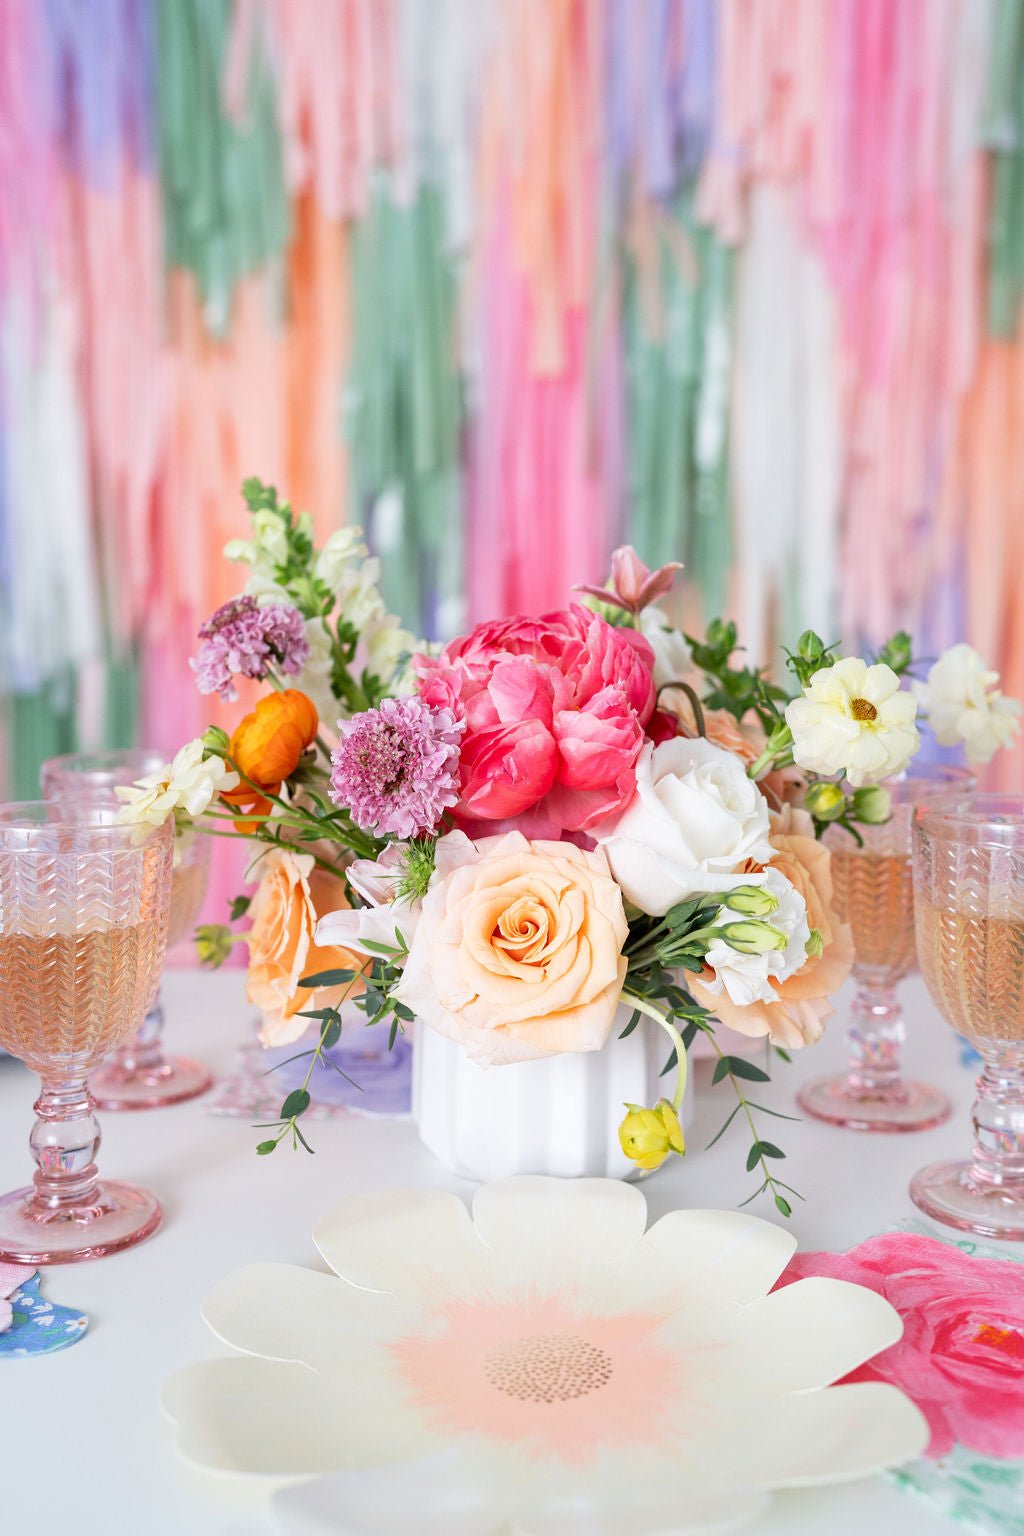 Garden Party Fringe Backdrop - Oh My Darling Party Co-baby pinkbaby showerblush #Fringe_Backdrop#